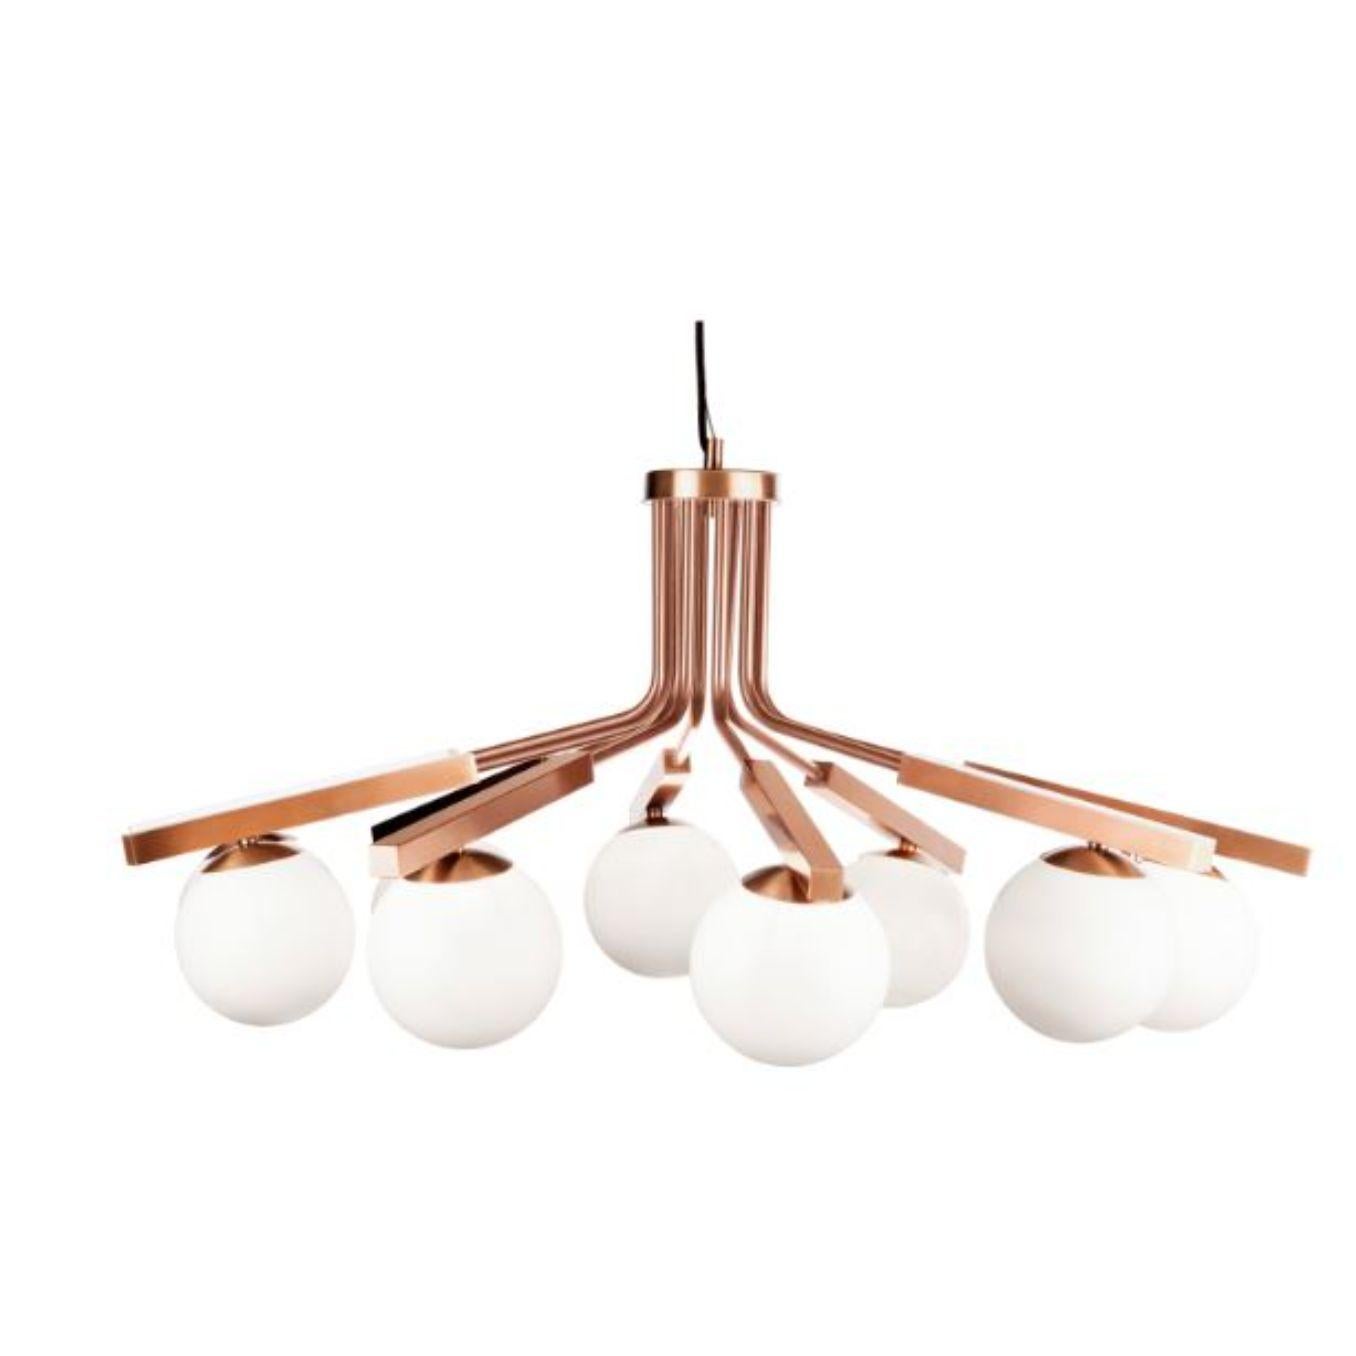 Copper Globe Suspension lamp by Dooq
Dimensions: W 100 x D 100 x H 50 cm
Materials: lacquered metal, polished or brushed metal, copper.
Also available in different colors and materials. 

Information:
230V/50Hz
10 x max. G9
4W